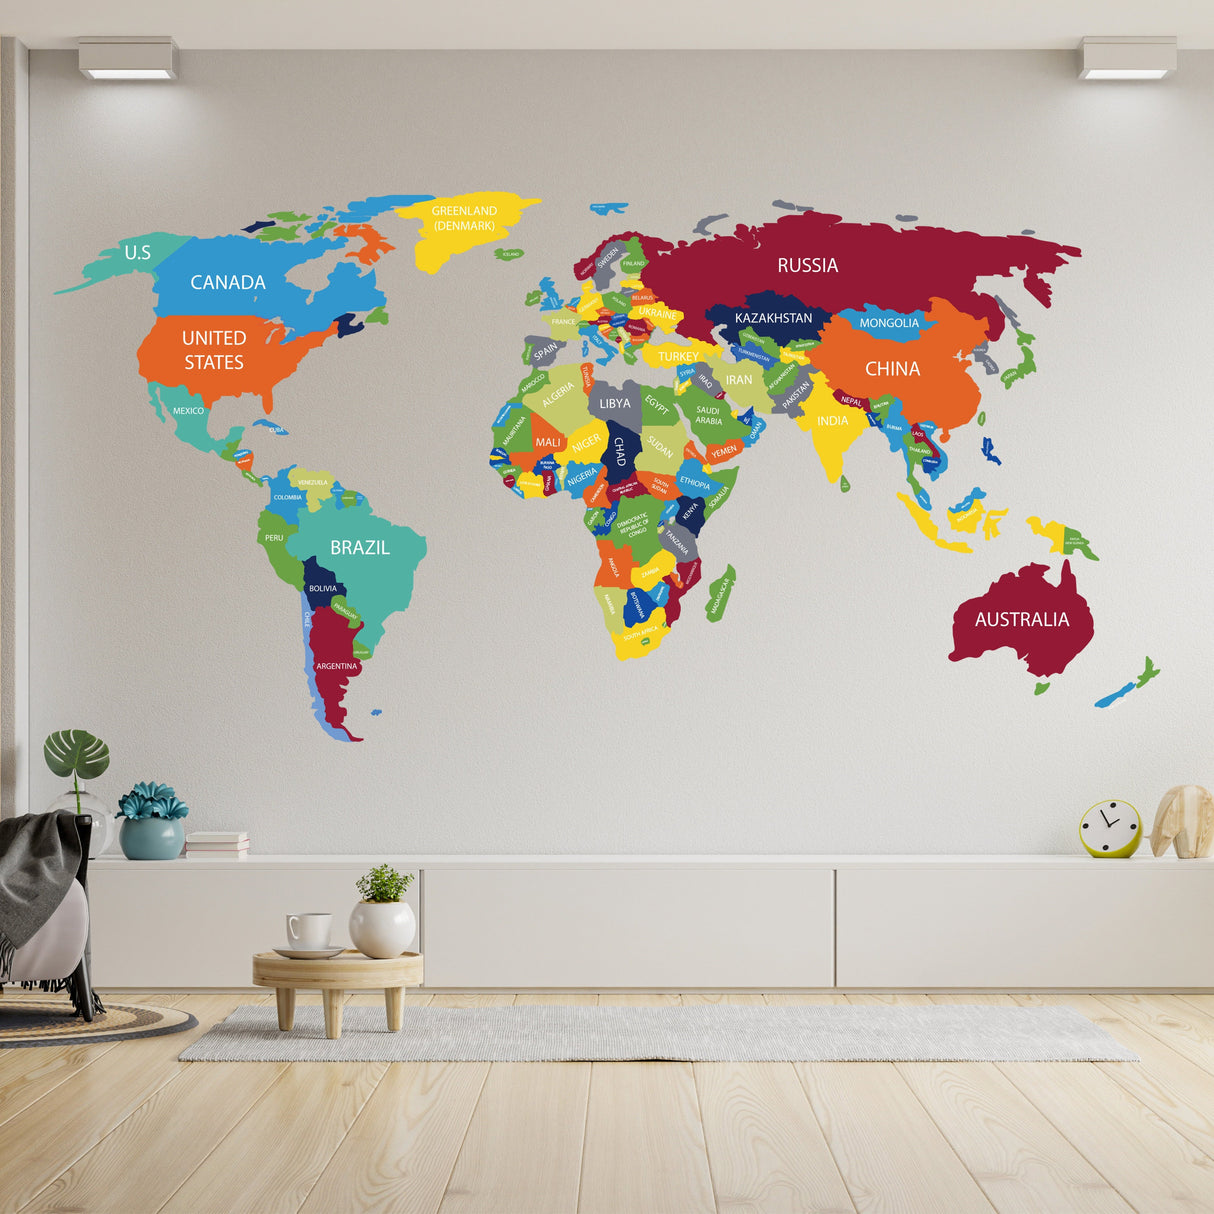 Large World Map Wall Decal - Giant Travel Globe with Country Names Vinyl Sticker